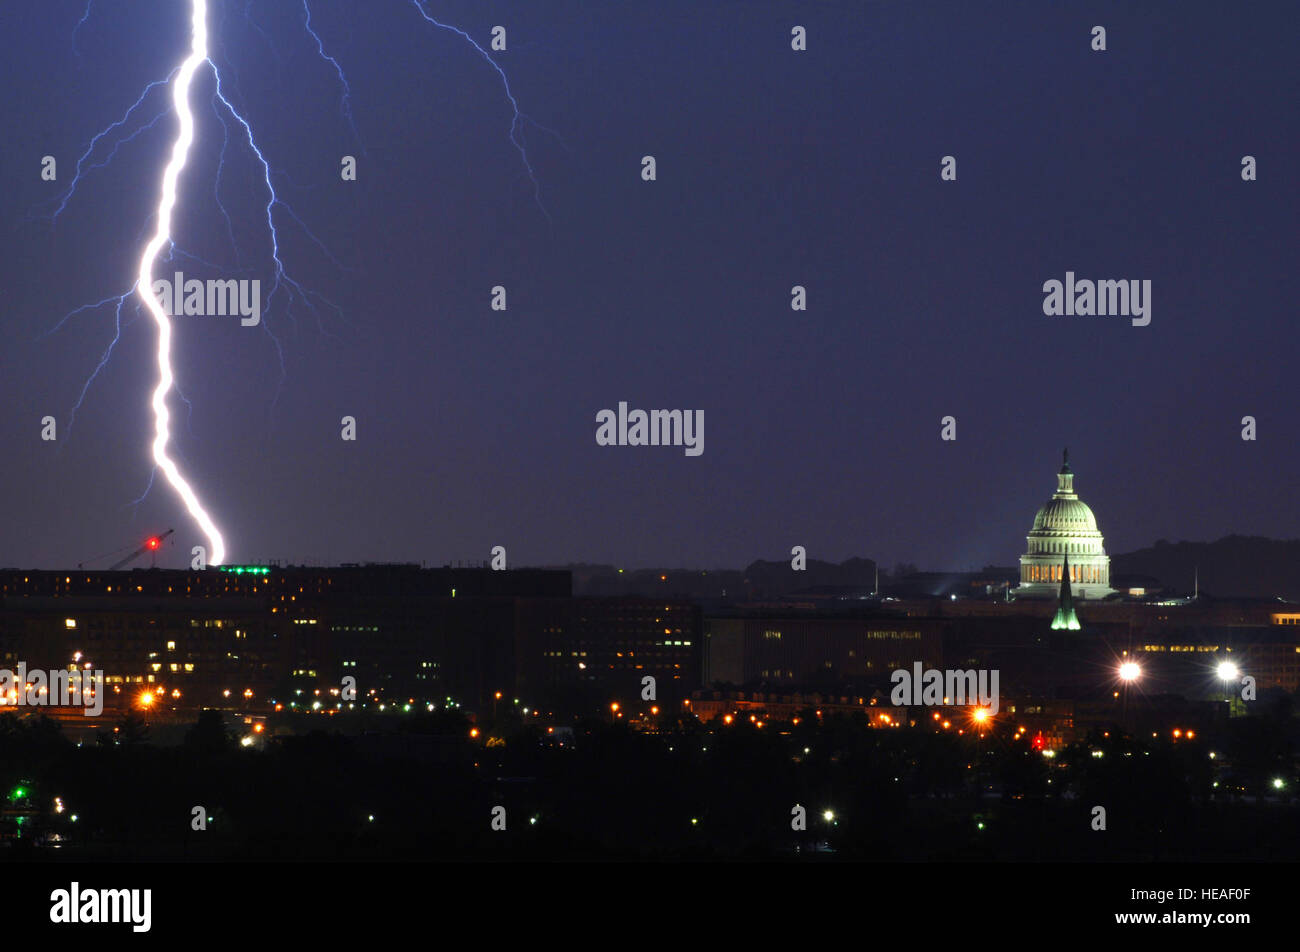 Lightening strikes near the U.S. Capitol building during a thunderstorm in Washington, D.C., May 14, 2005.   Tech. Sgt. Cherie A. Thurlby, U.S. Air Force. Stock Photo